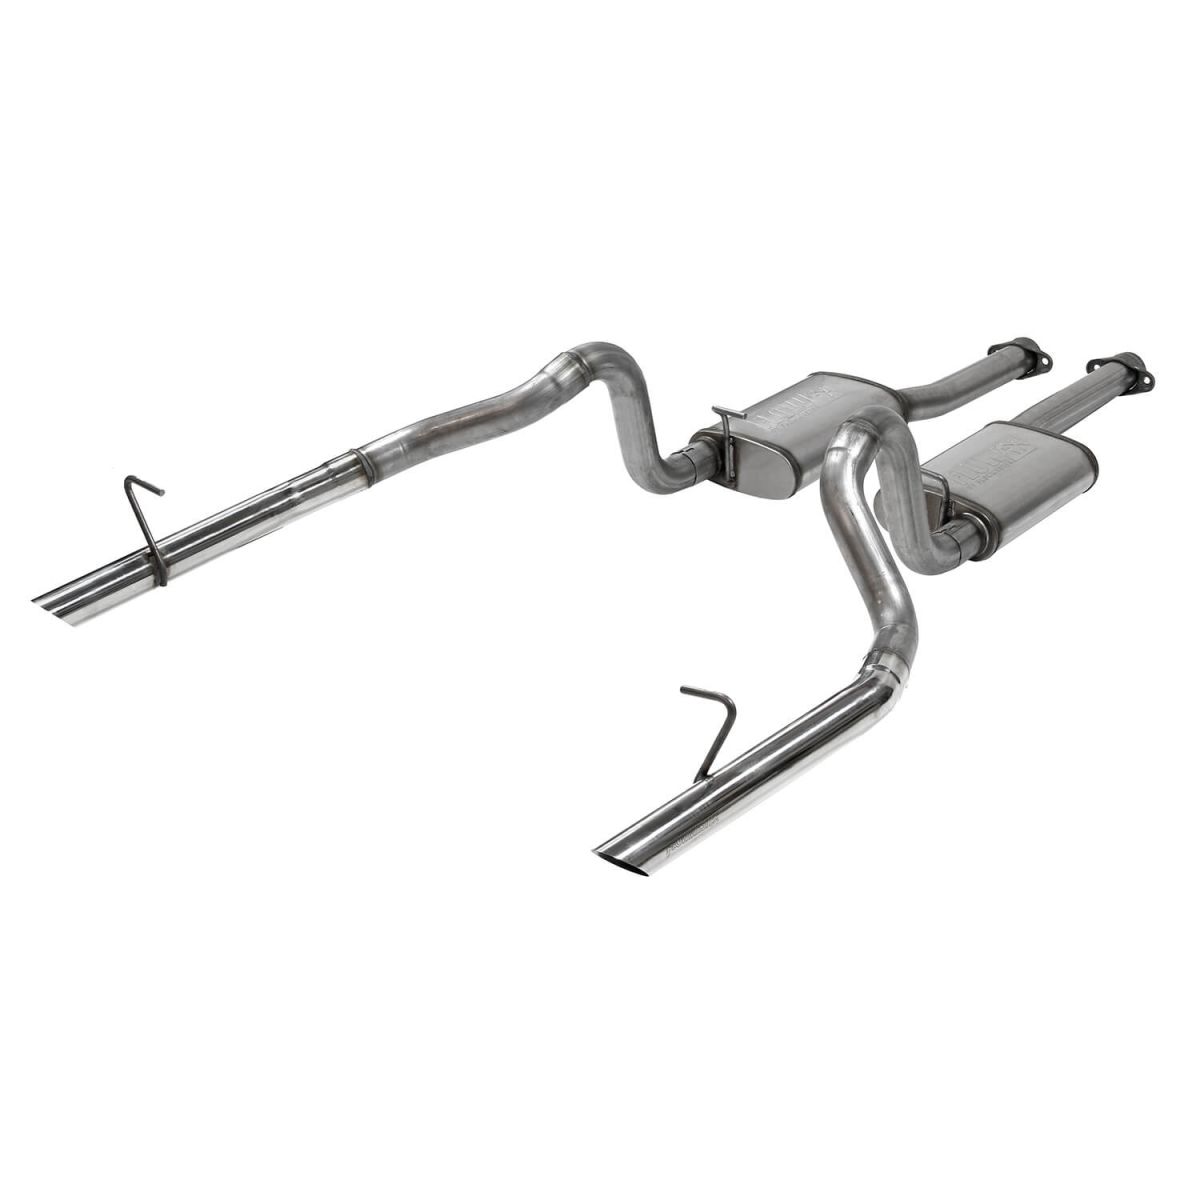 Flowmaster - Flowmaster FlowFX Cat-Back Dual Exhaust System For 86-93 Ford Mustang LX 5.0L